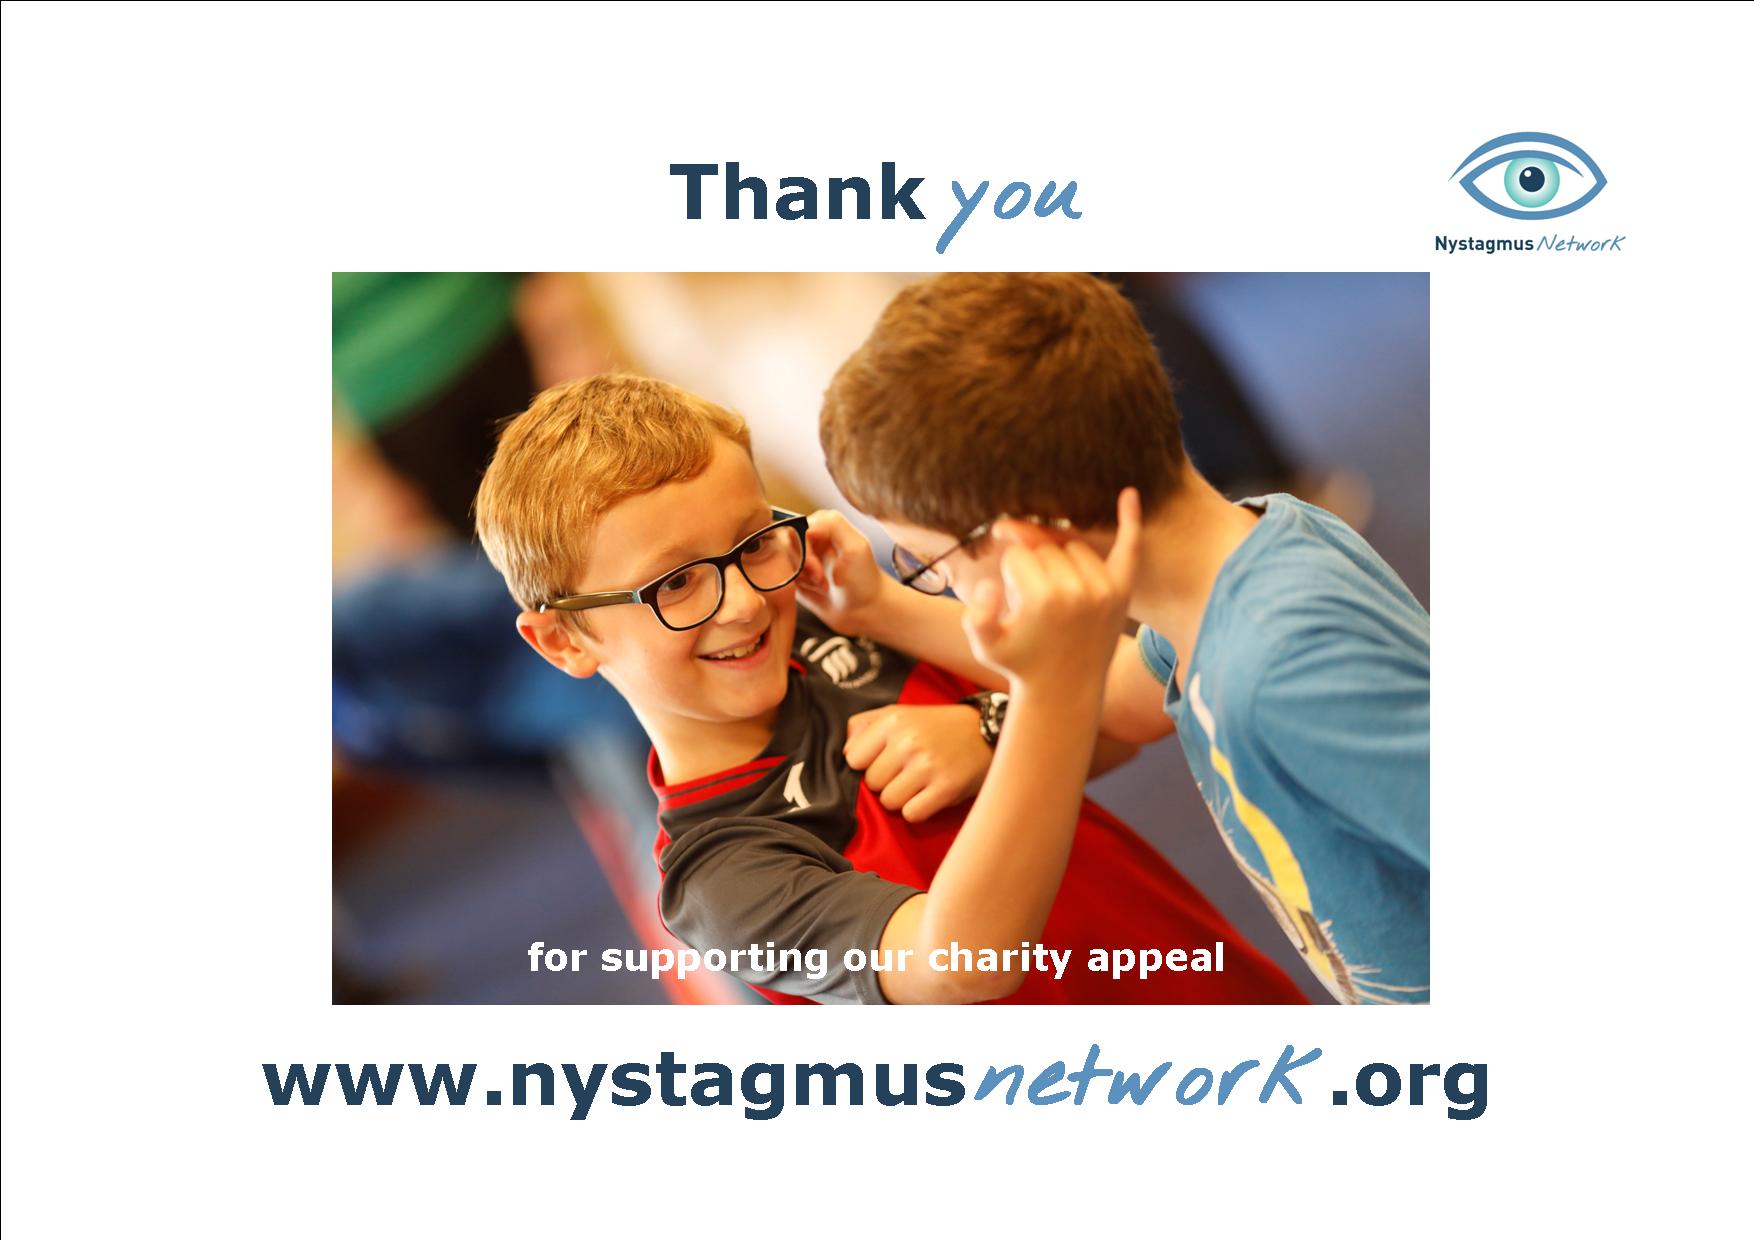 A thank you card from the Nystagmus Network showing an image of 2 boys taking part in a team building exercise.